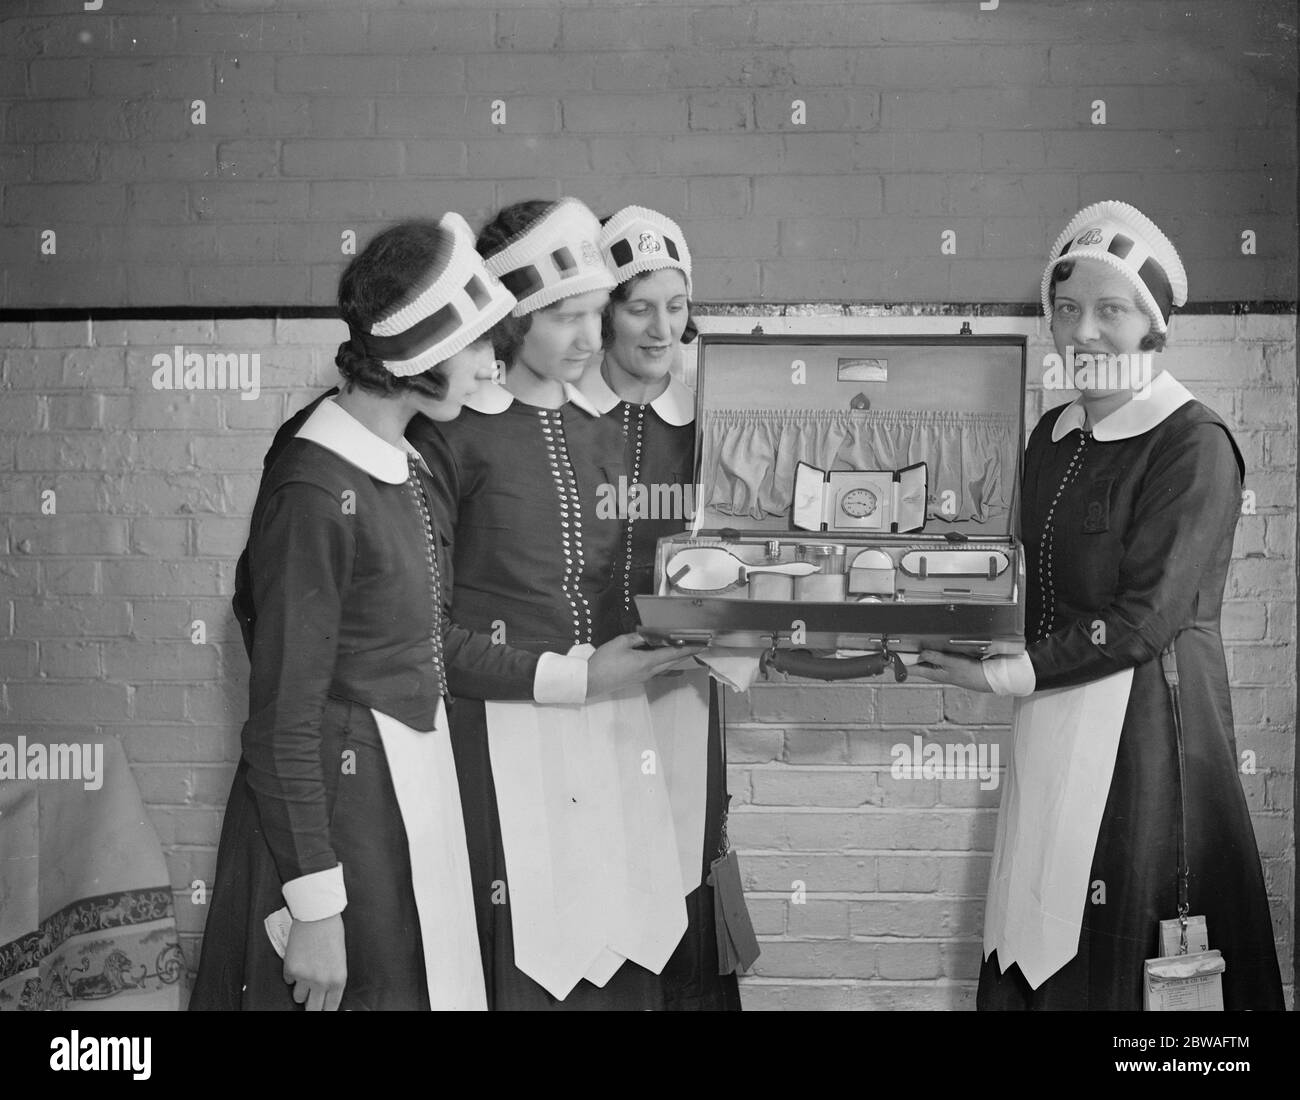 Champion ' Nippy ' Miss Dorothy Porter , who has been awarded the first prize for efficiency at the annual examination of ' Nippy ' waitresses 1 March 1932 Nippys specifically worked in J. Lyons & Co tea shops and cafes Stock Photo